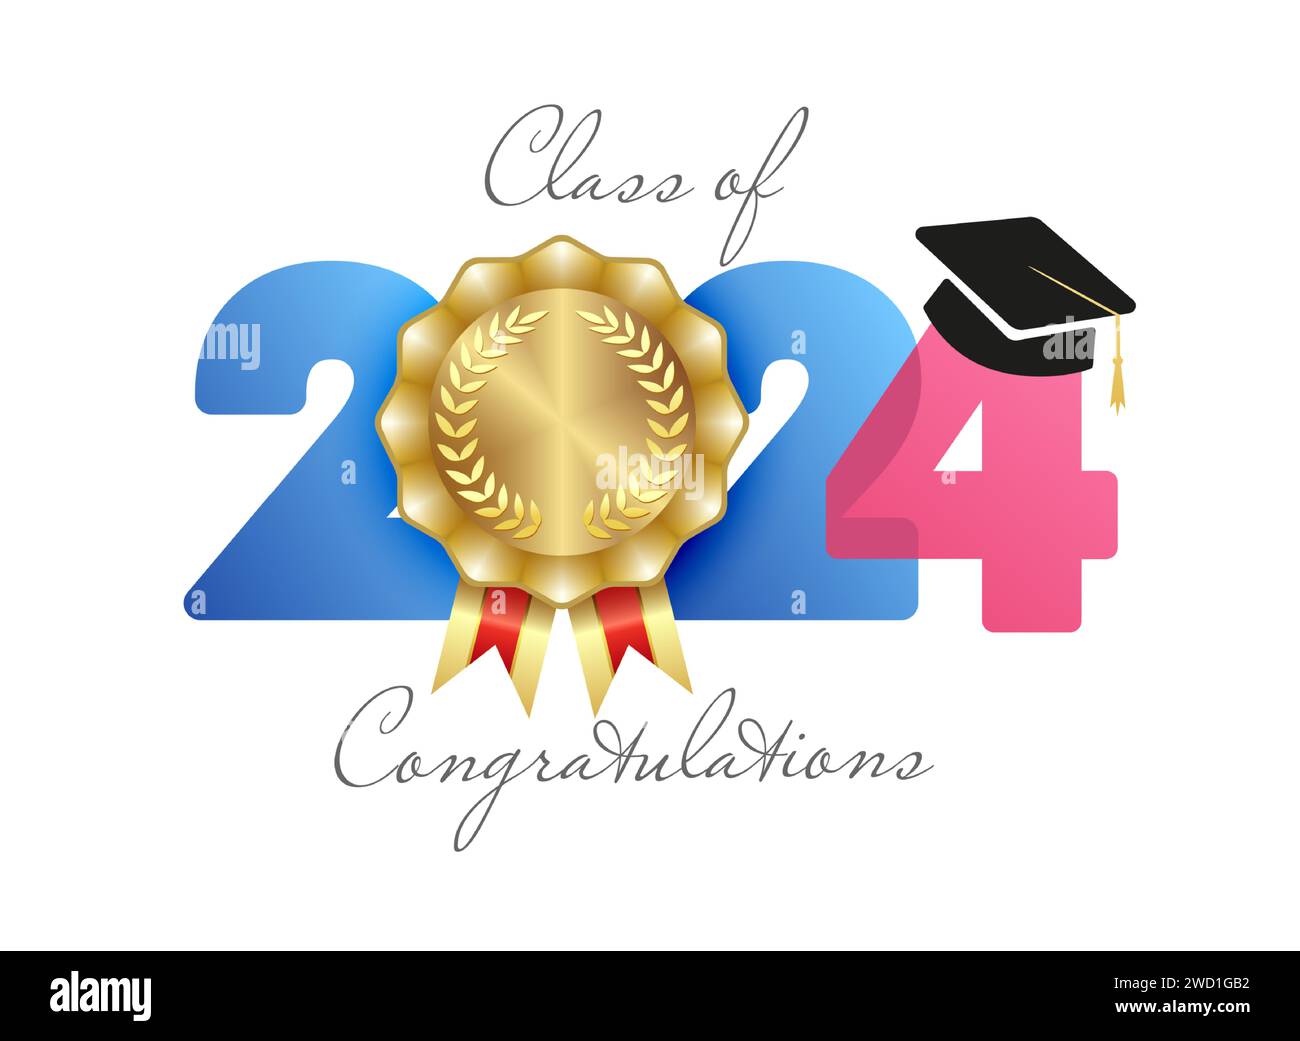 Class of 2024 congrats graphic banner. Educational symbol. Congratulations graduates number icon with golden medal. Gold rosette design. Creative sign Stock Vector